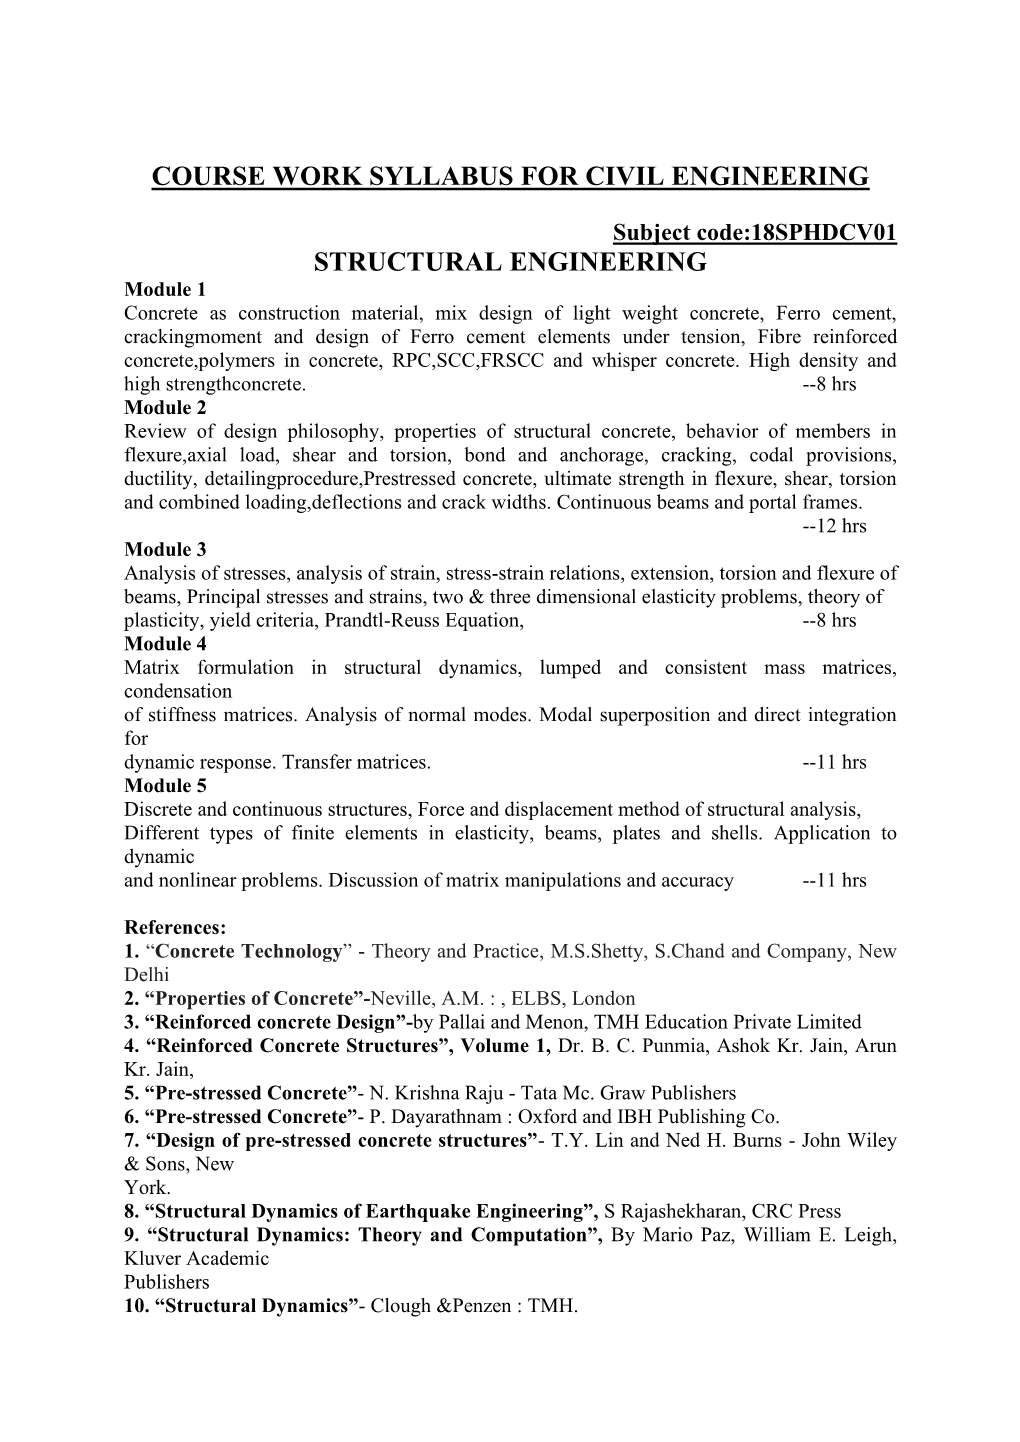 Course Work Syllabus for Civil Engineering